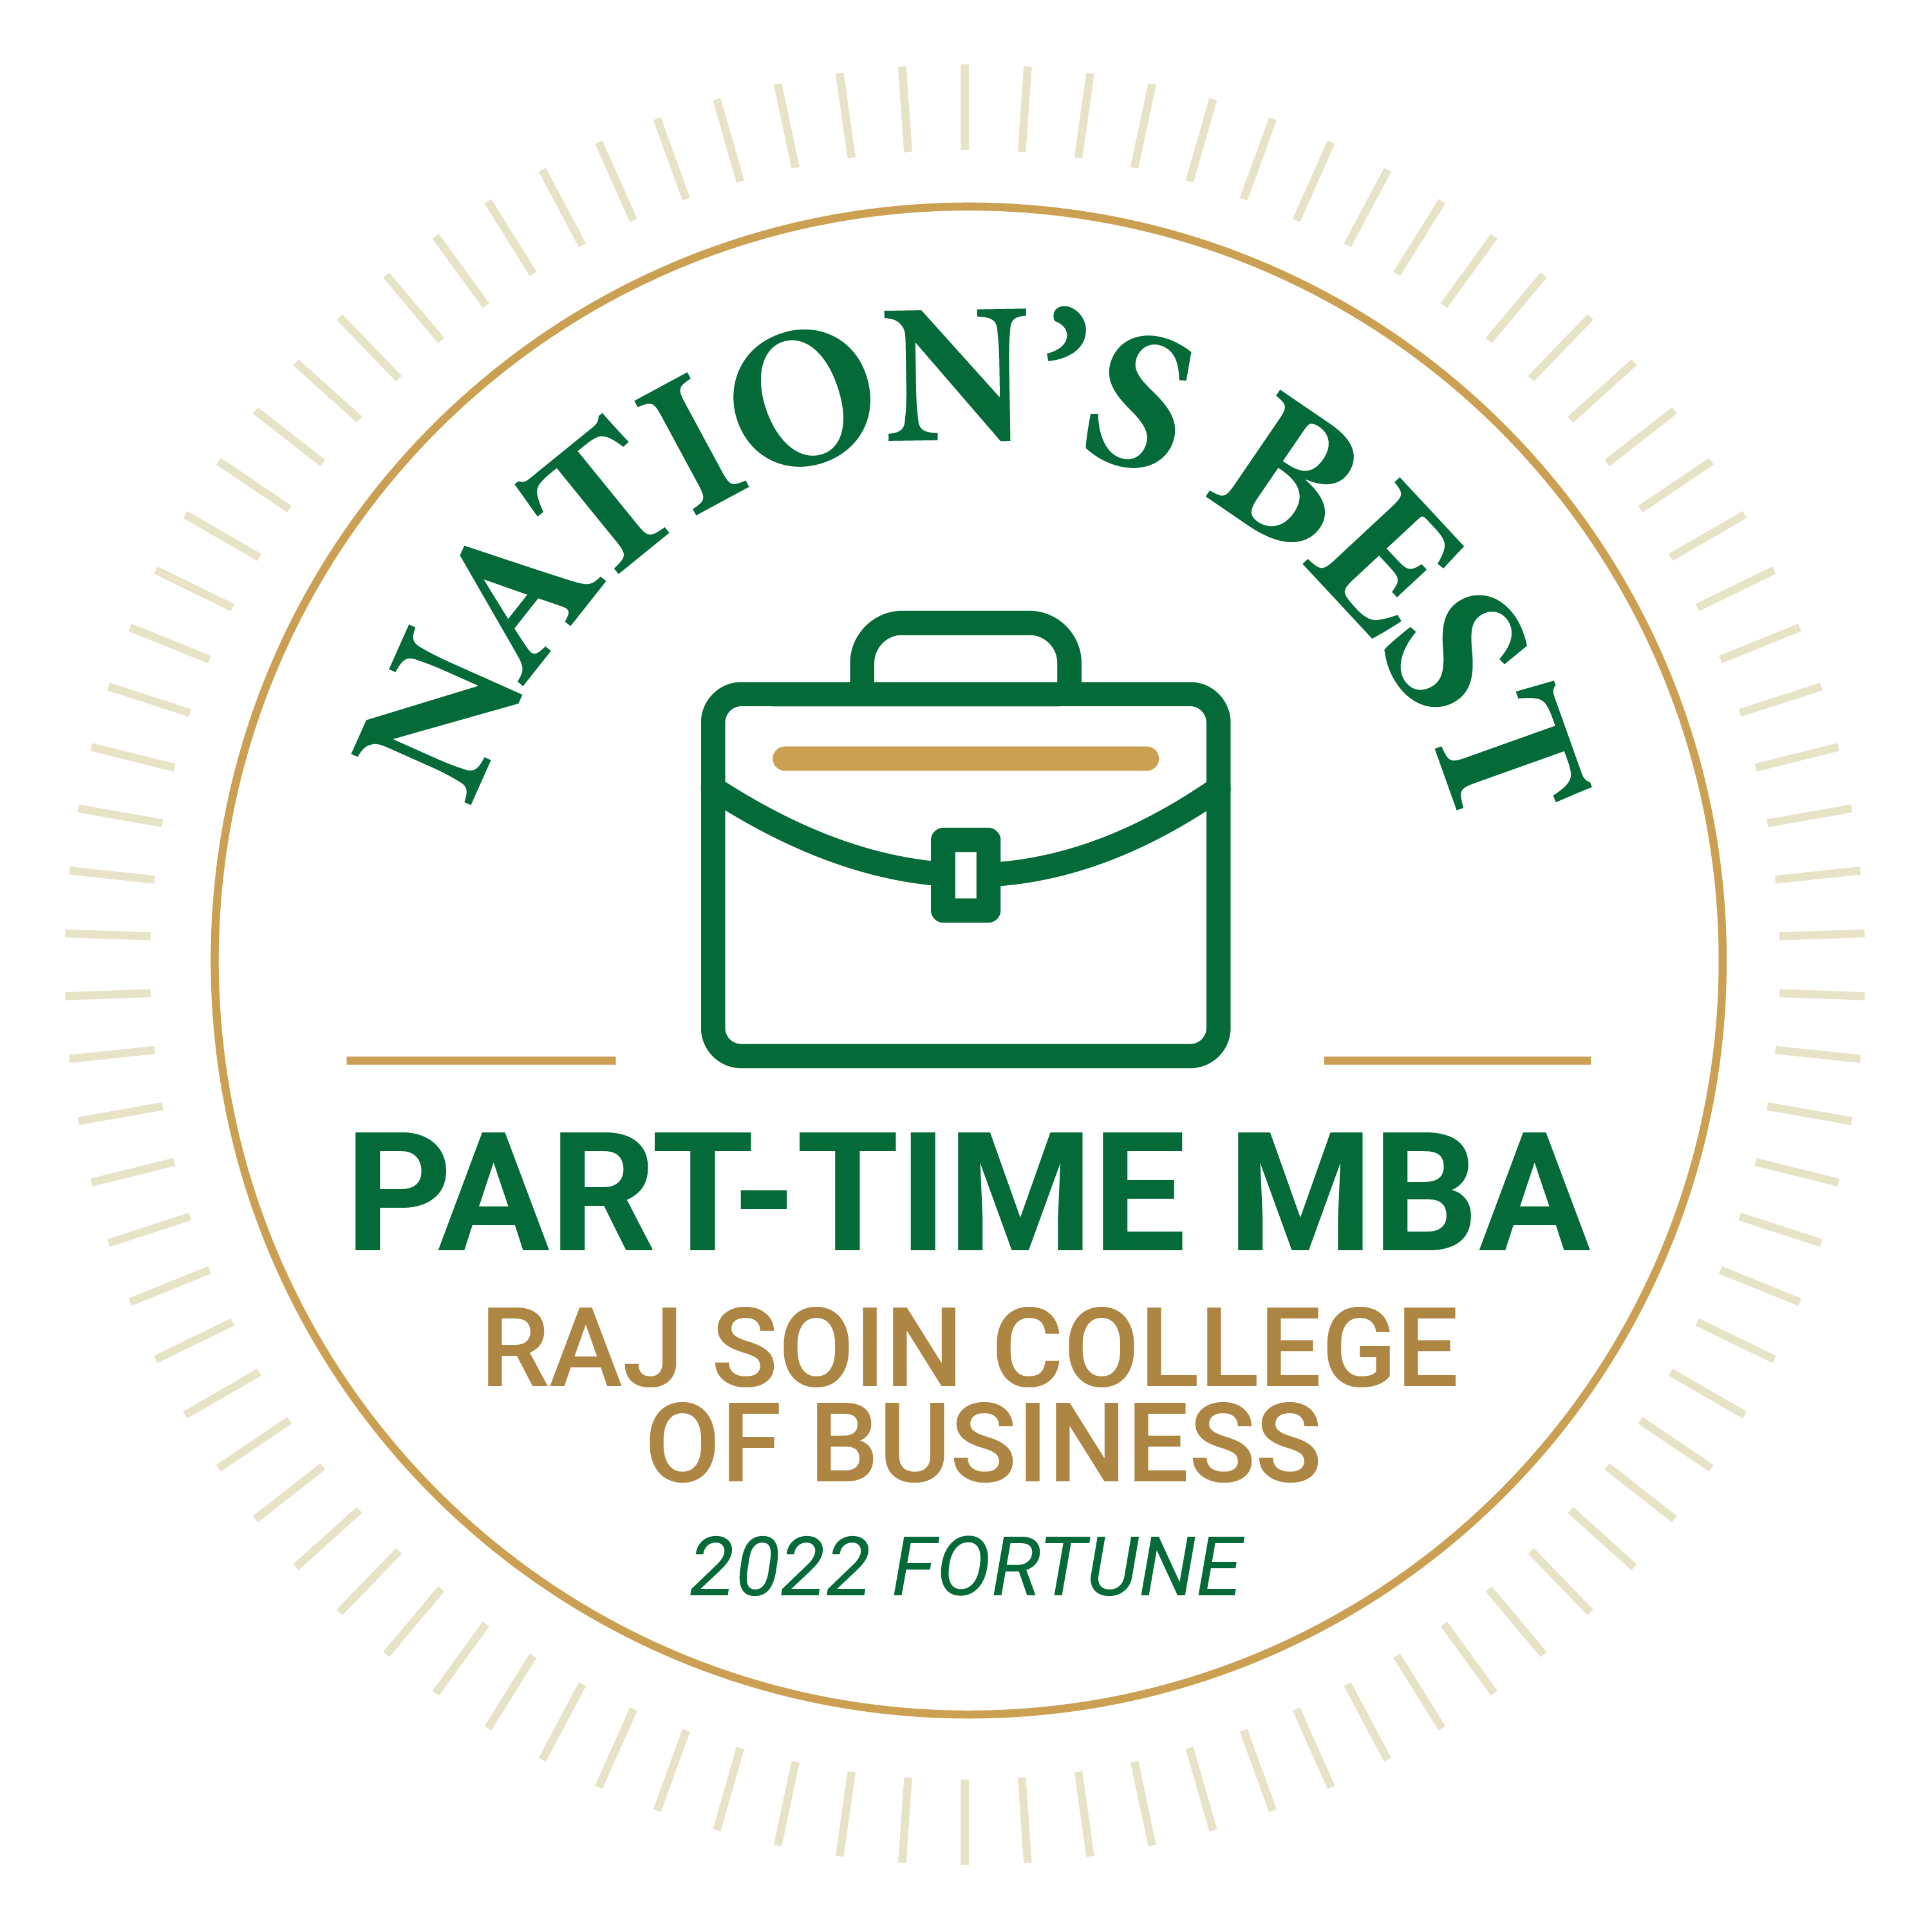 2022 Fortune Nation's Best Part Time MBA Raj Soin College of Business